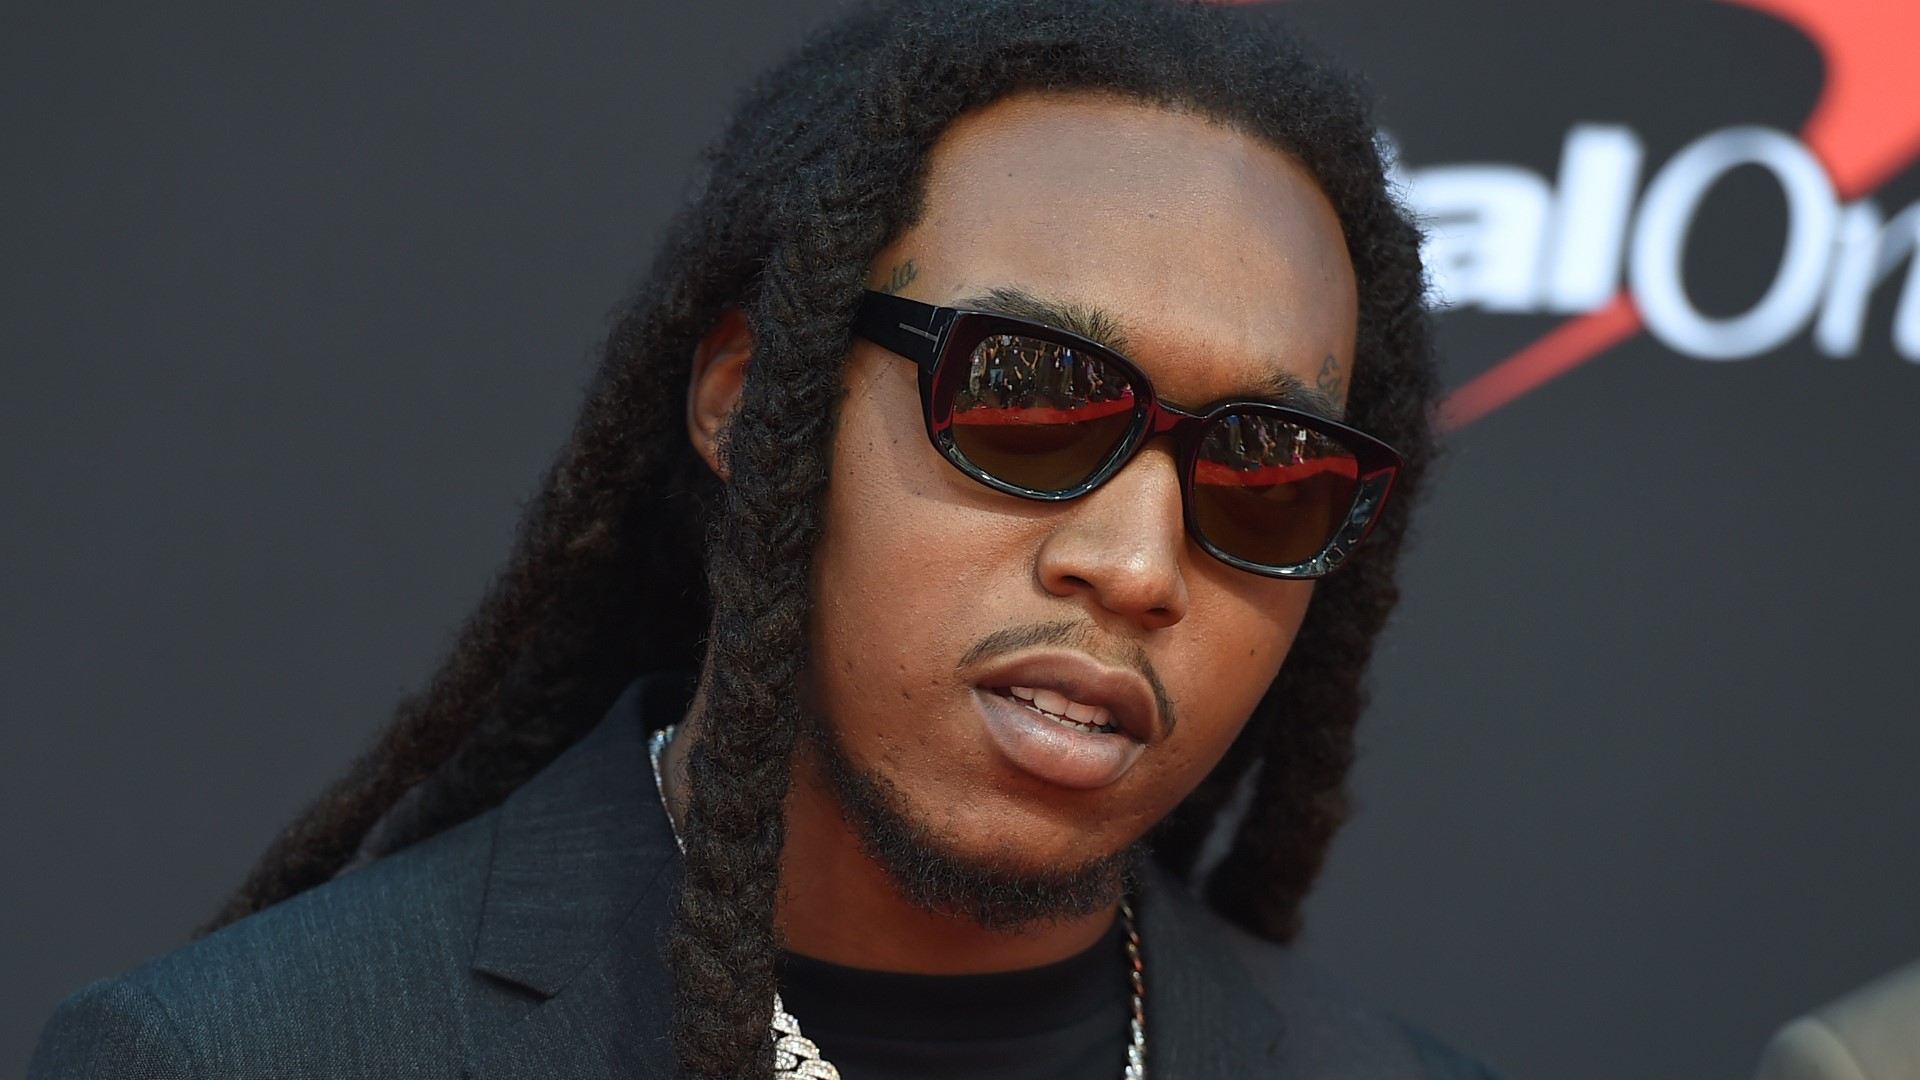 HPD said TakeOff and Quavo of the Atlanta-based rap trio were at a private party at the 810 Billiards and Bowling Alley prior to the deadly shooting.